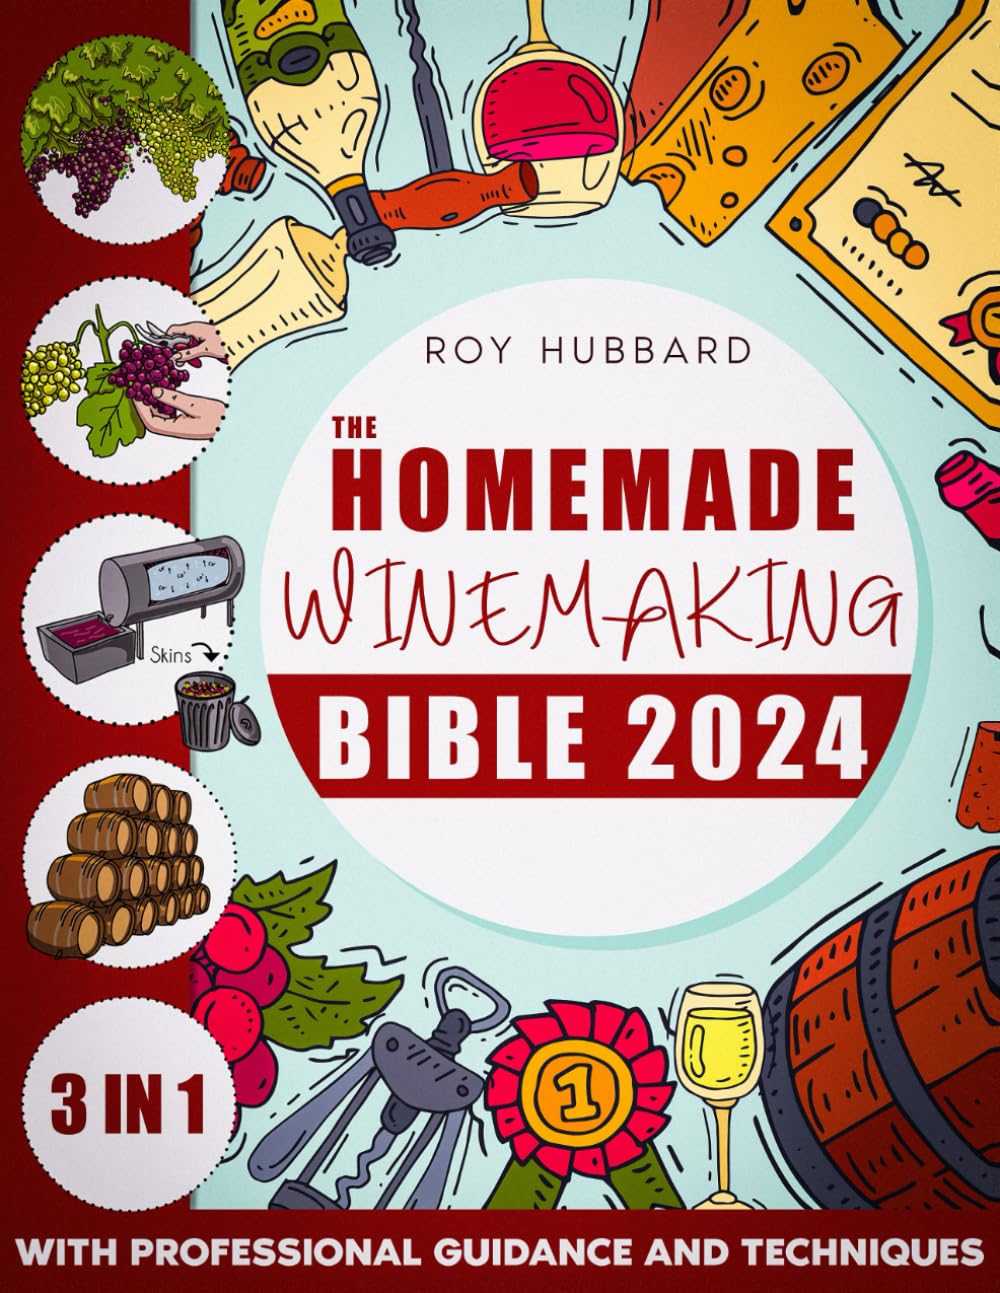 The Homemade Winemaking Bible: [3 IN 1] From Grapes to Glory | Mastering the Art of Home Winemaking with Professional Guidance and Techniques